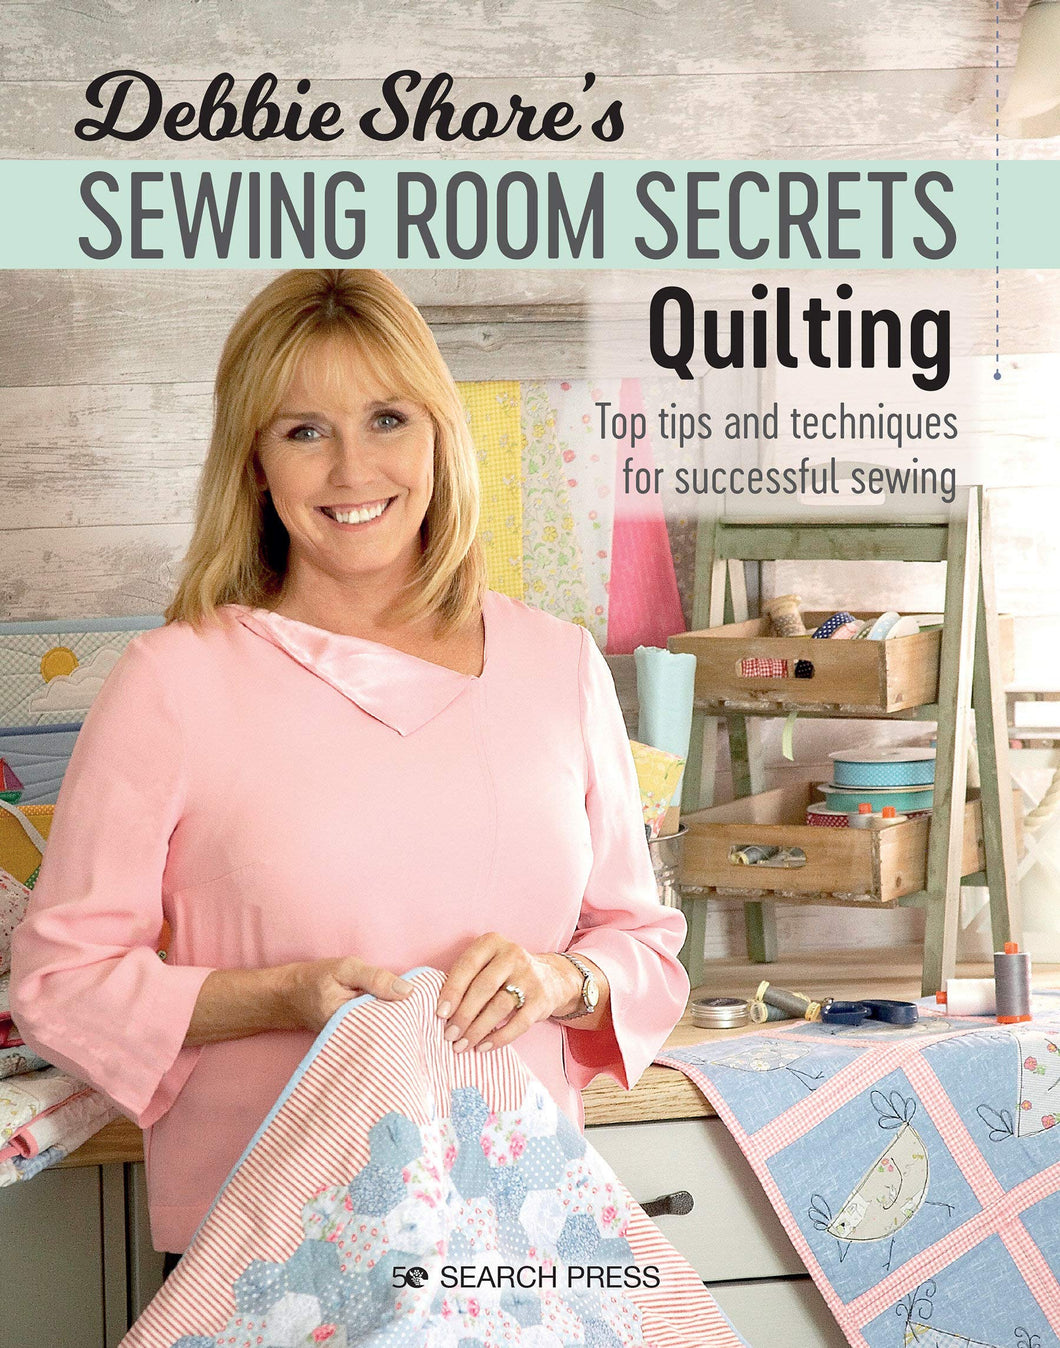 Sewing Room Secrets - Quilting